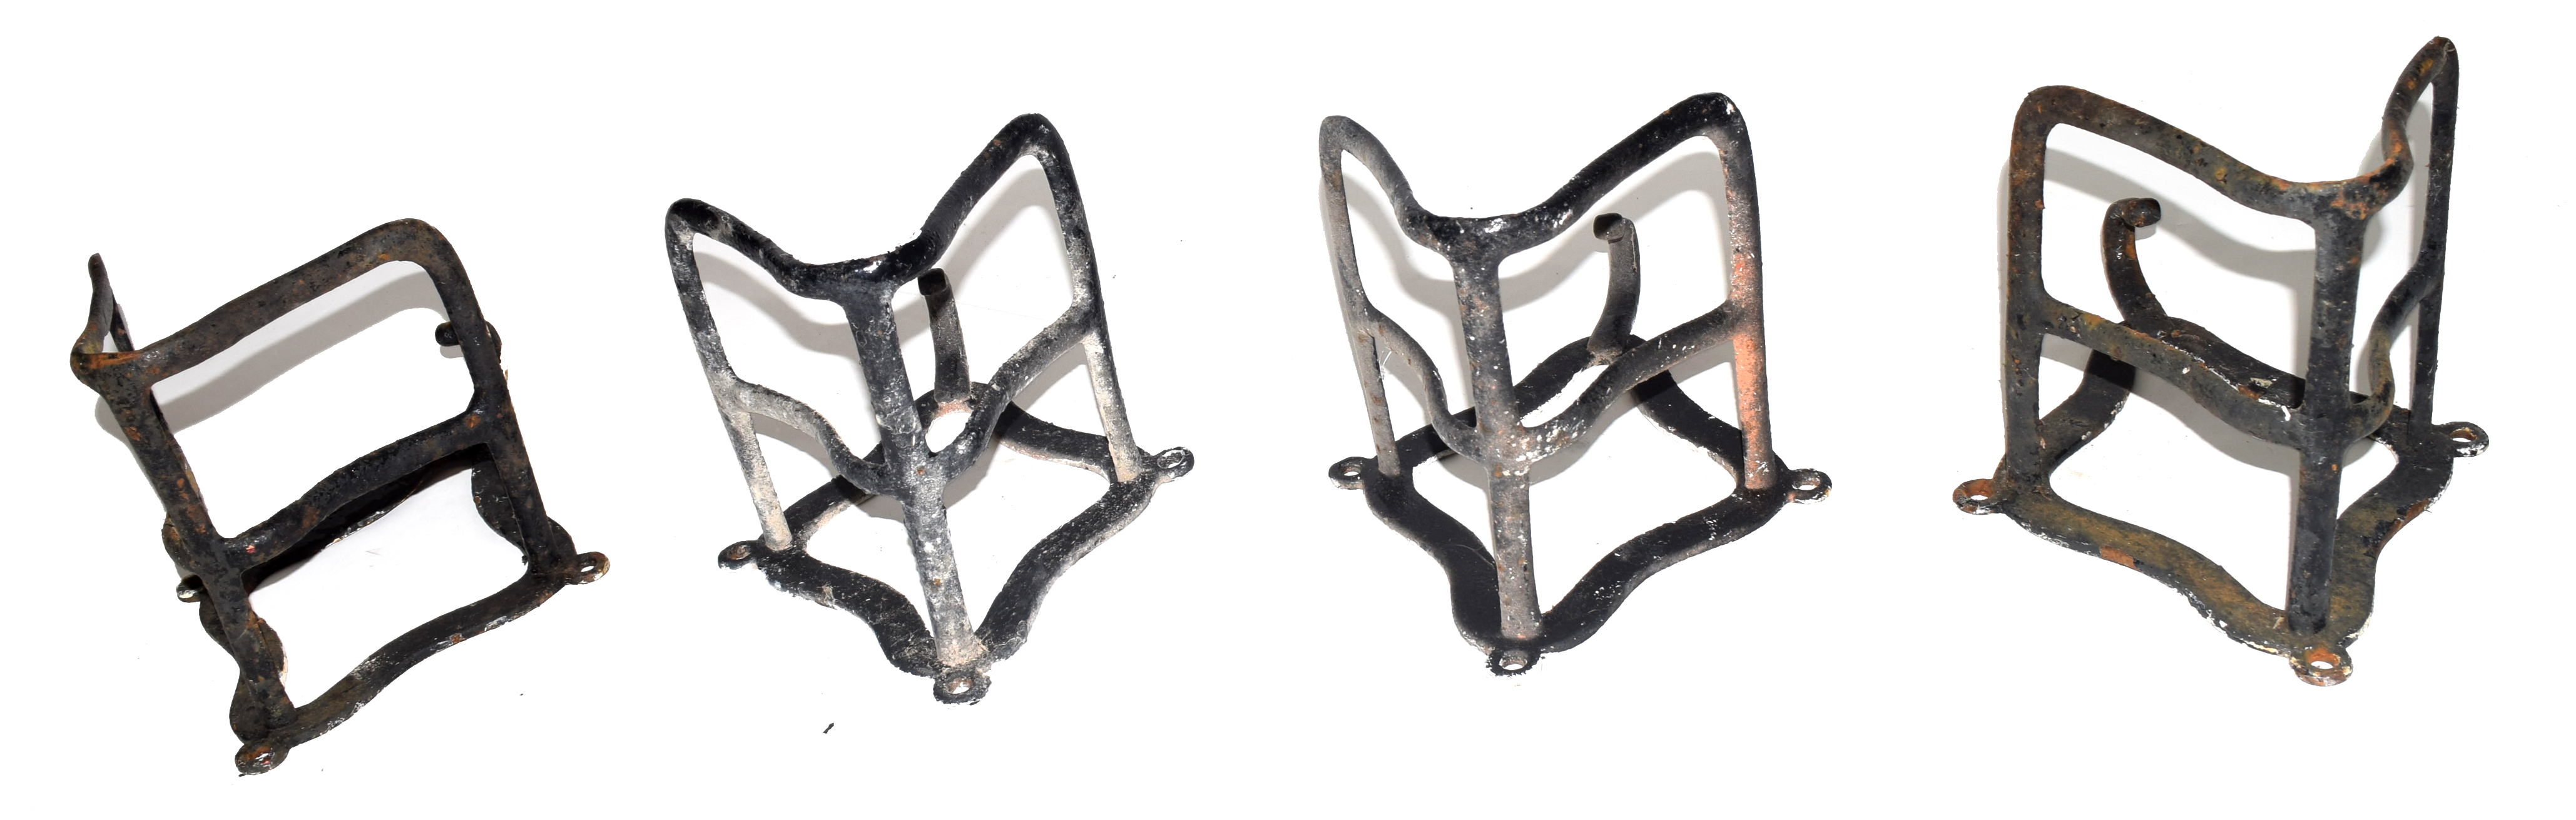 Four Victorian iron saddle racks, approx 30cm high - Image 3 of 4